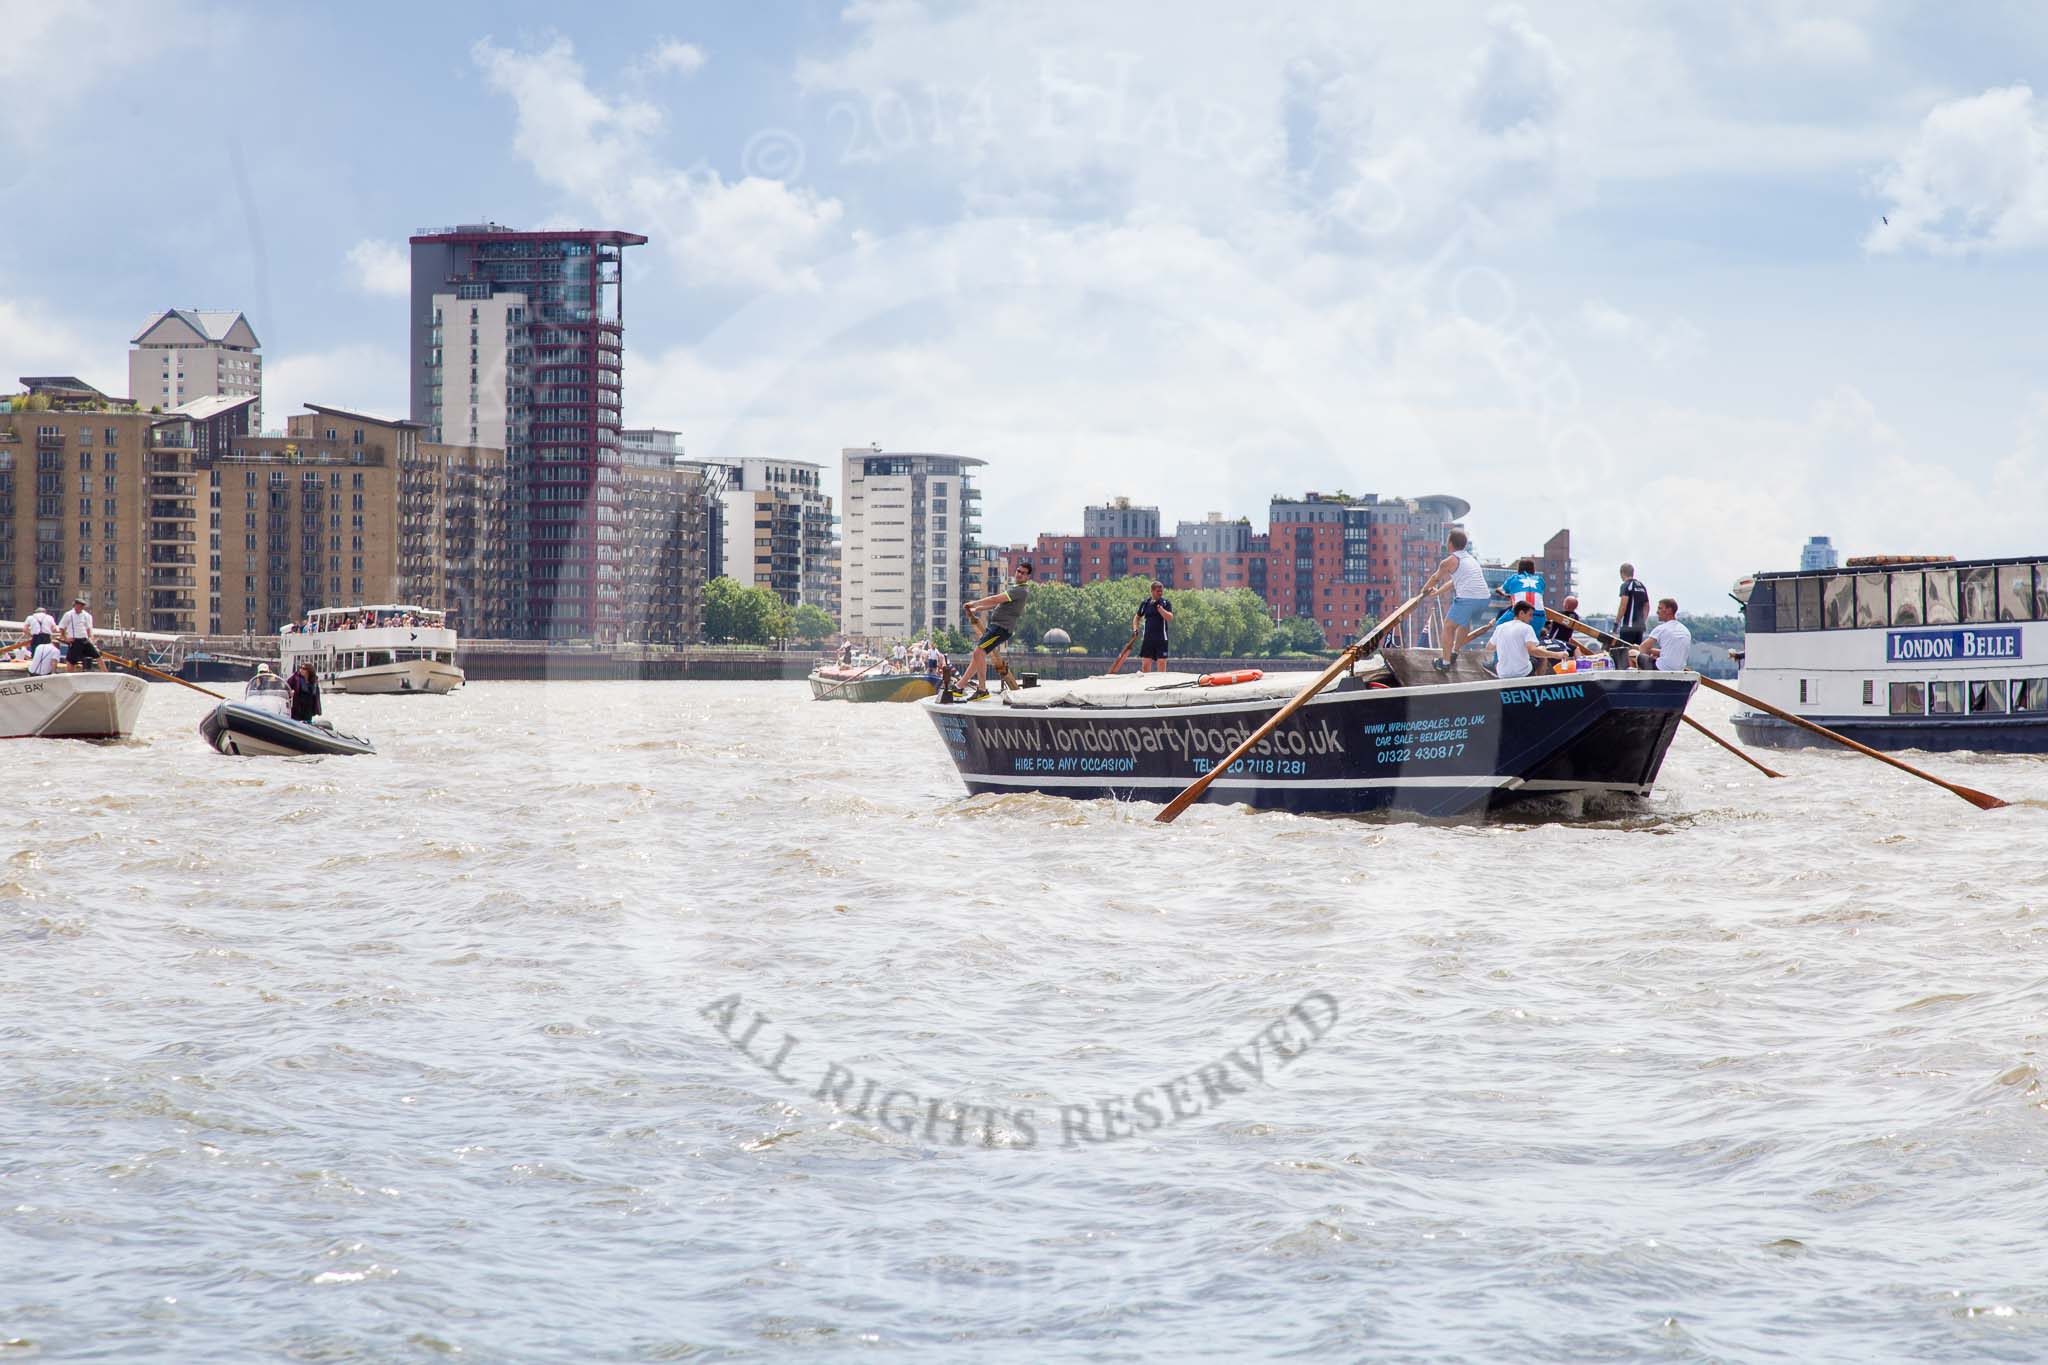 TOW River Thames Barge Driving Race 2014.
River Thames between Greenwich and Westminster,
London,

United Kingdom,
on 28 June 2014 at 12:55, image #164